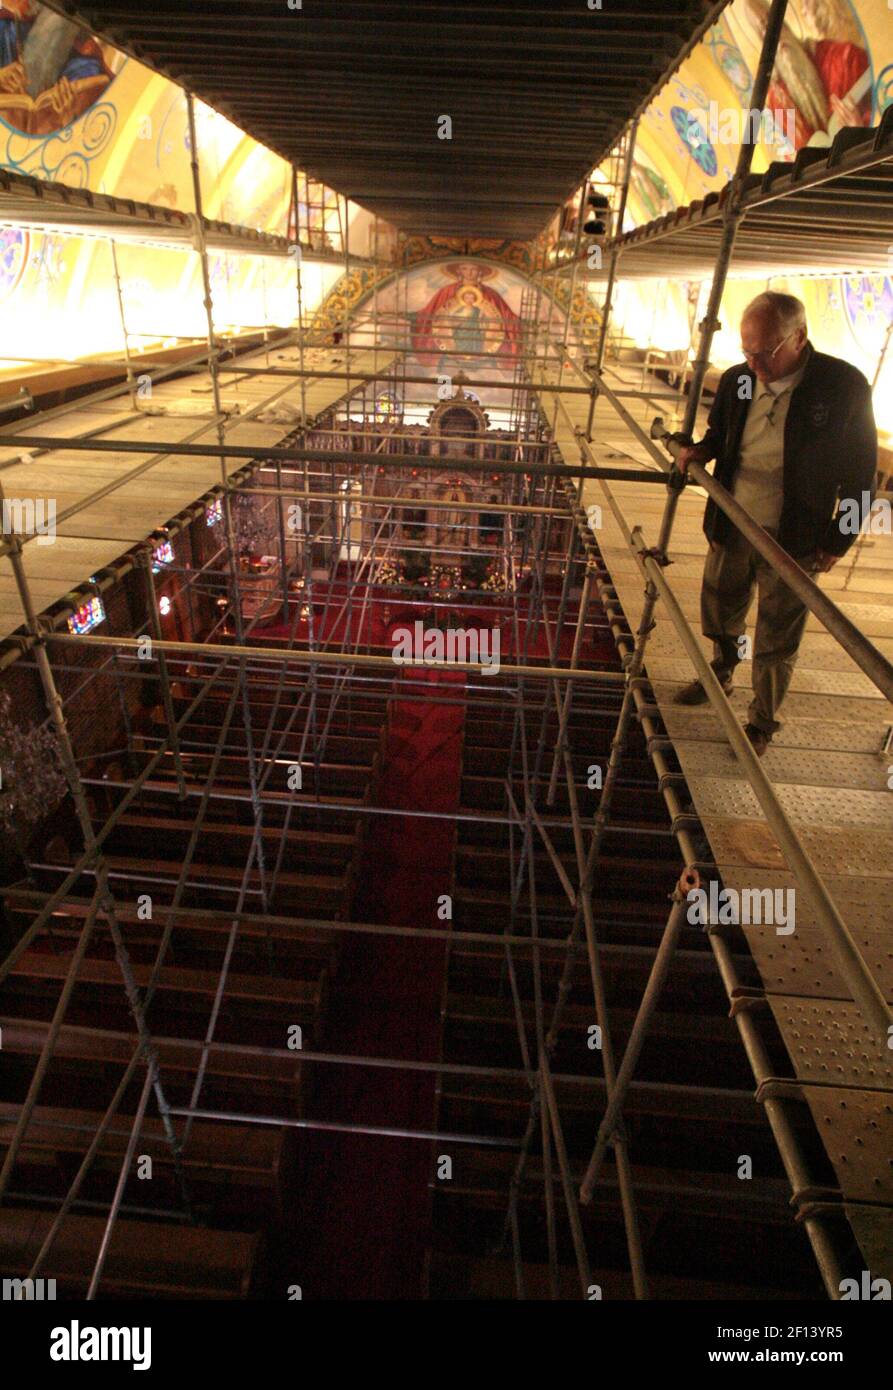 George Gianopulos, chairman of the St. George Greek Orthodox Church  iconography project in Frenso, California, looks down into the church's  sanctuary from a myriad of scaffoldings used by Russian iconographer Valery  Butyrsky